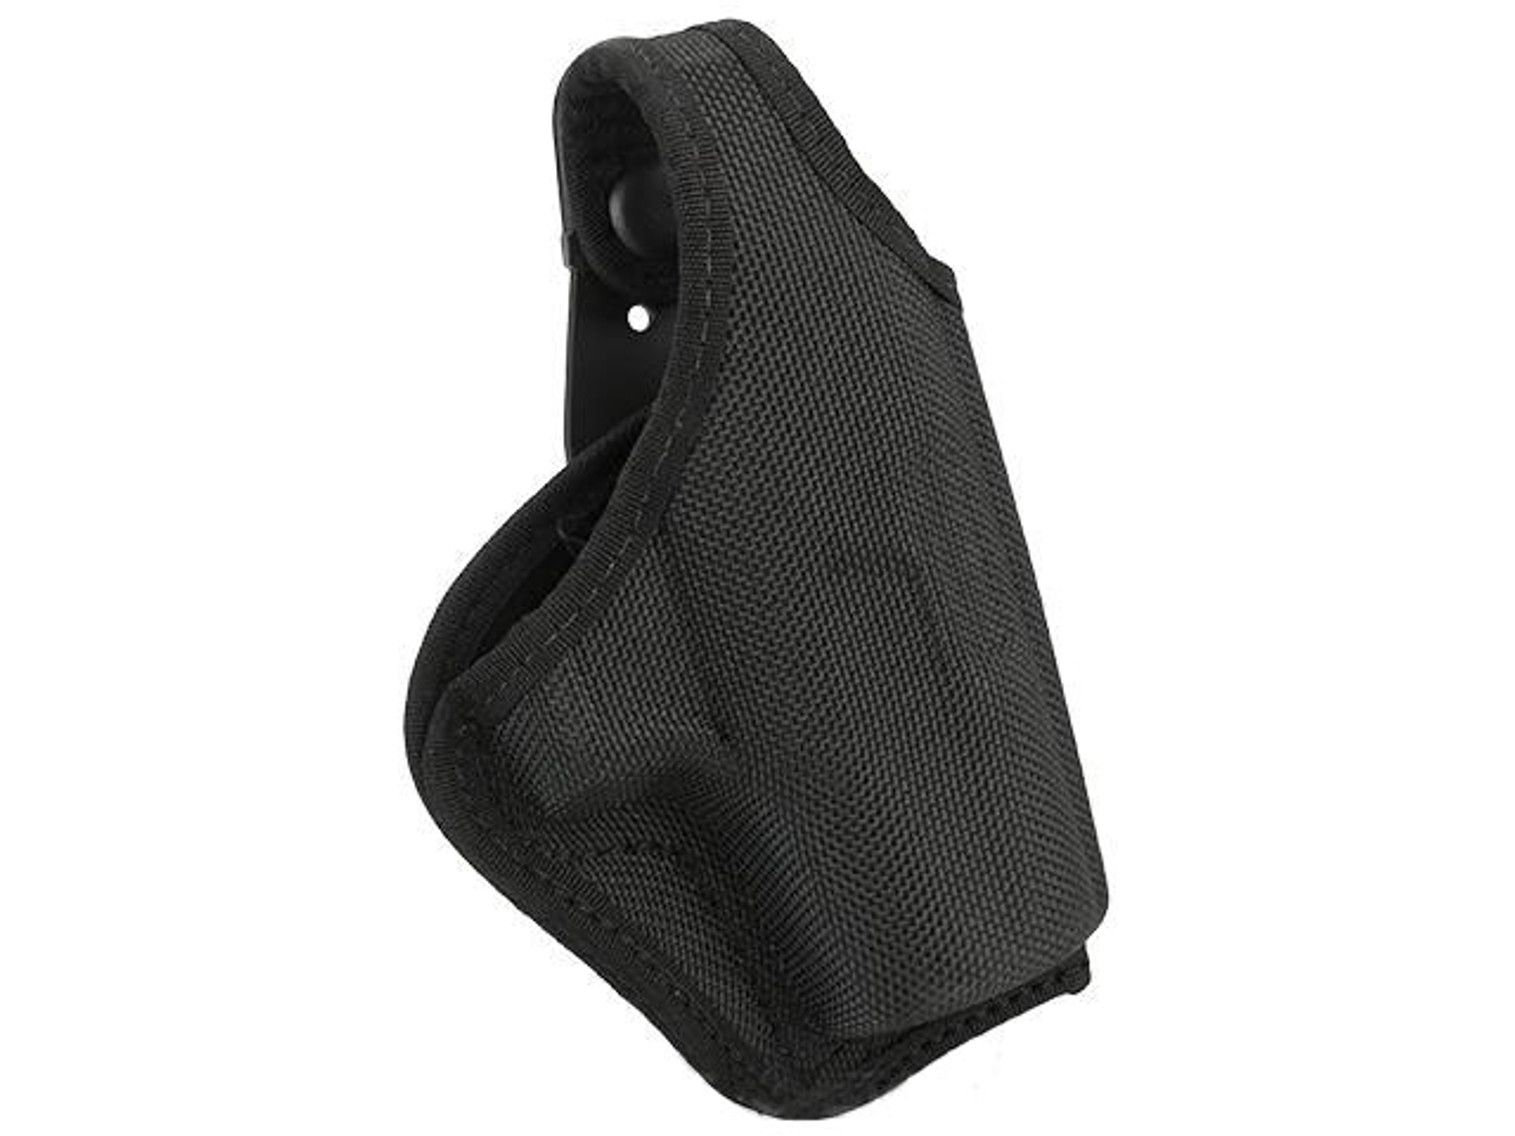 SAFARILAND / BIANCHI AccuMold Belt Clip Holster with Thumbsnap - S&W CS9 / 40 / 45 (Right)